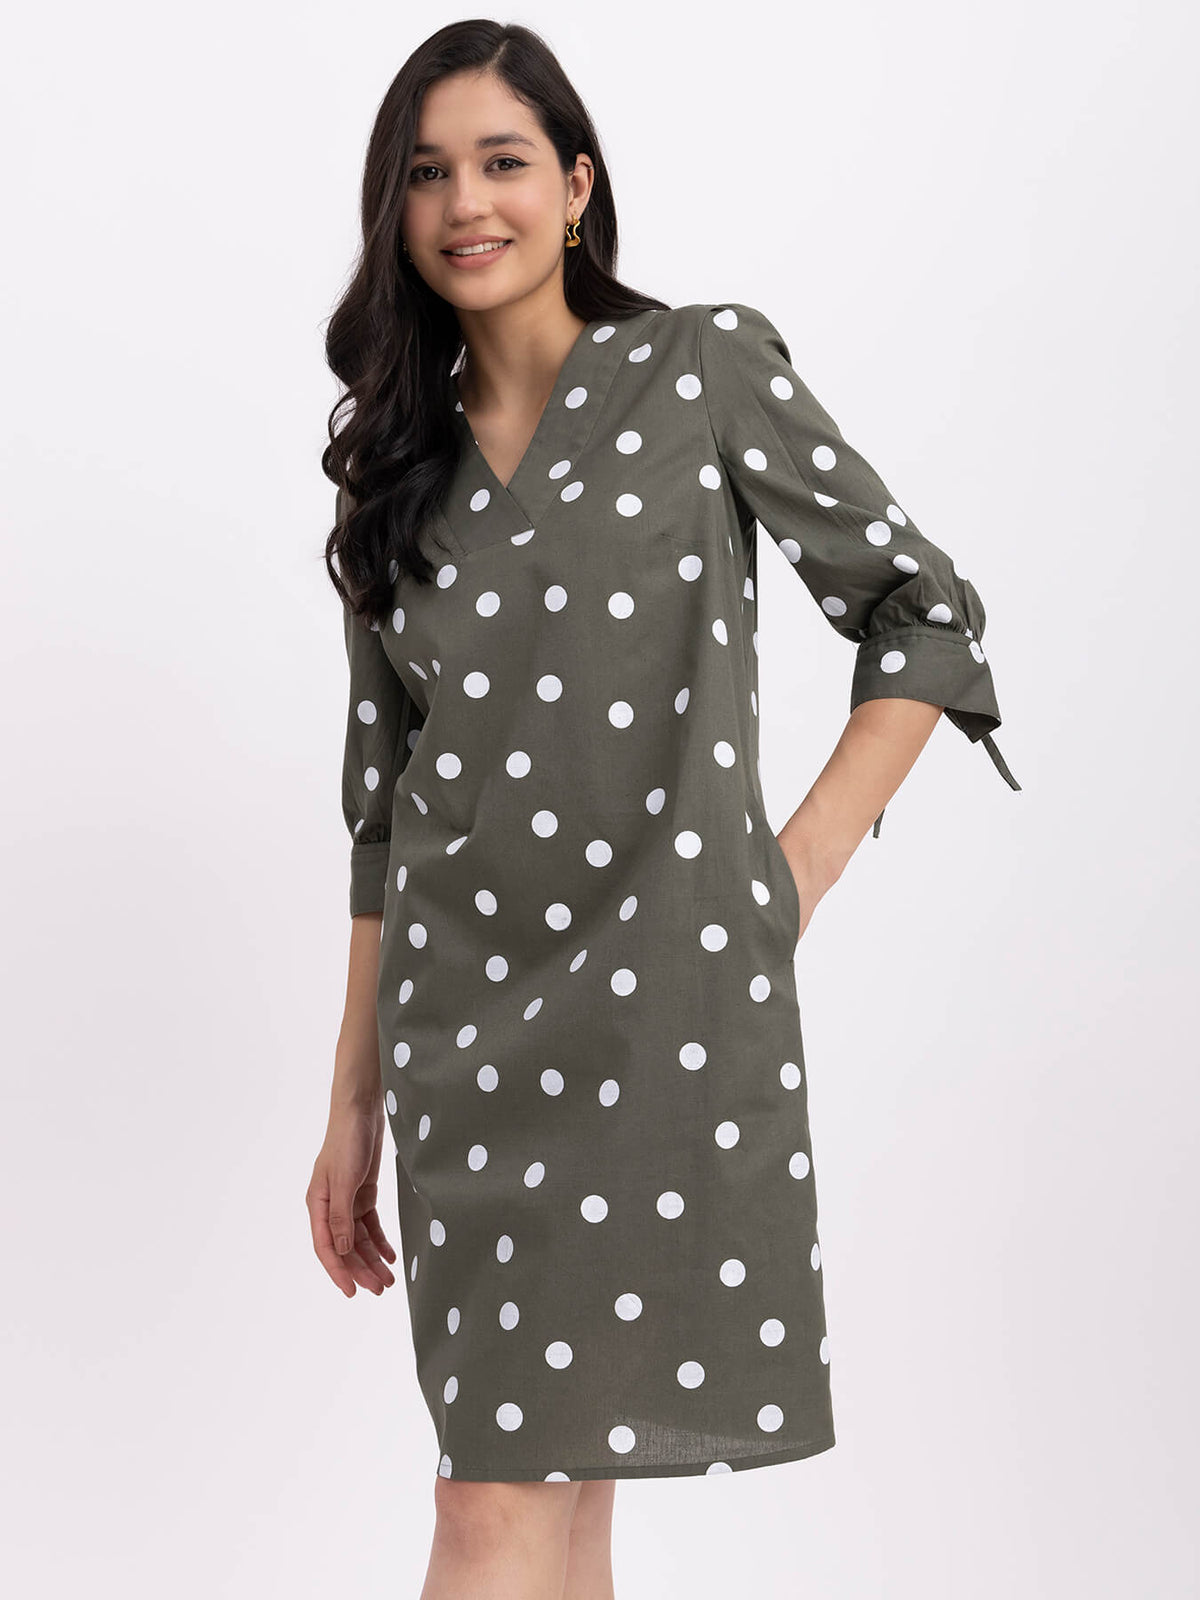 Cotton Tie-Up Sleeves Dress - Olive And White